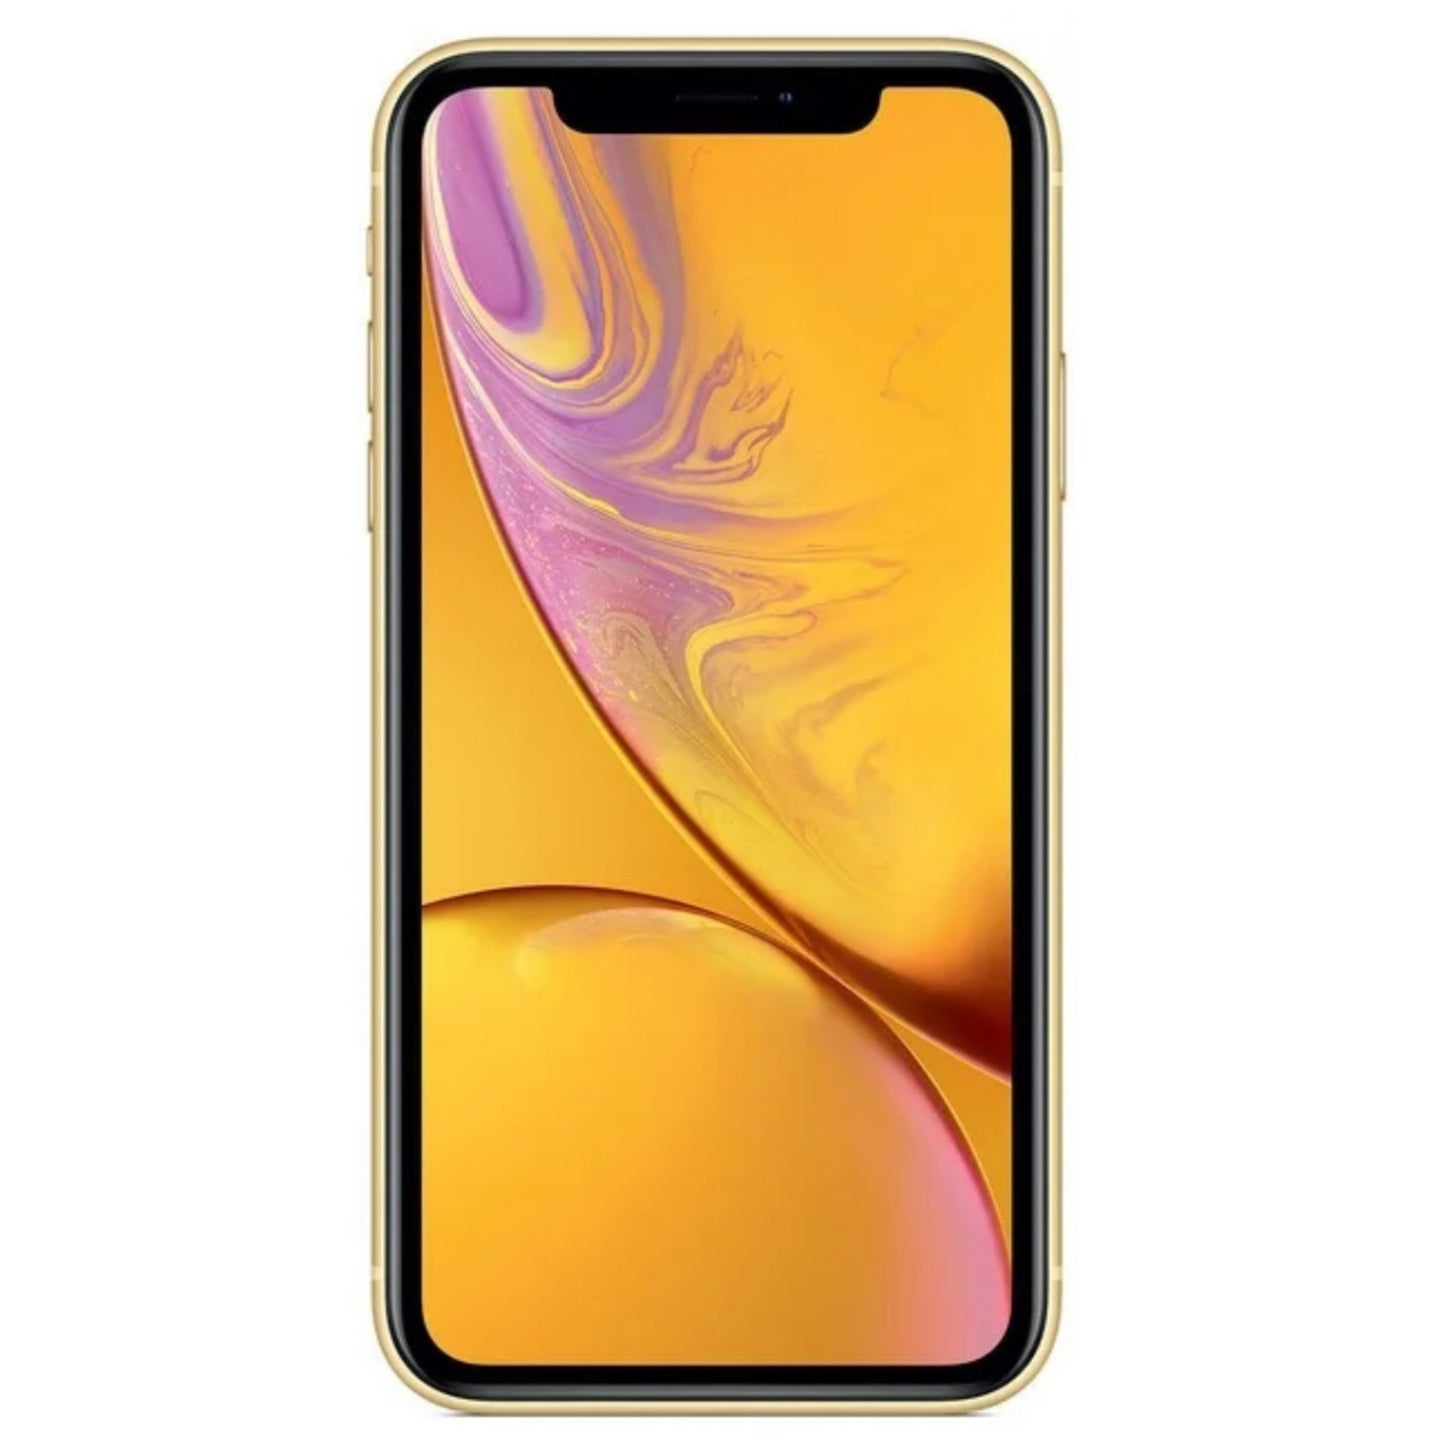 iPhone XR Yellow 64GB (Unlocked) Pre-Owned